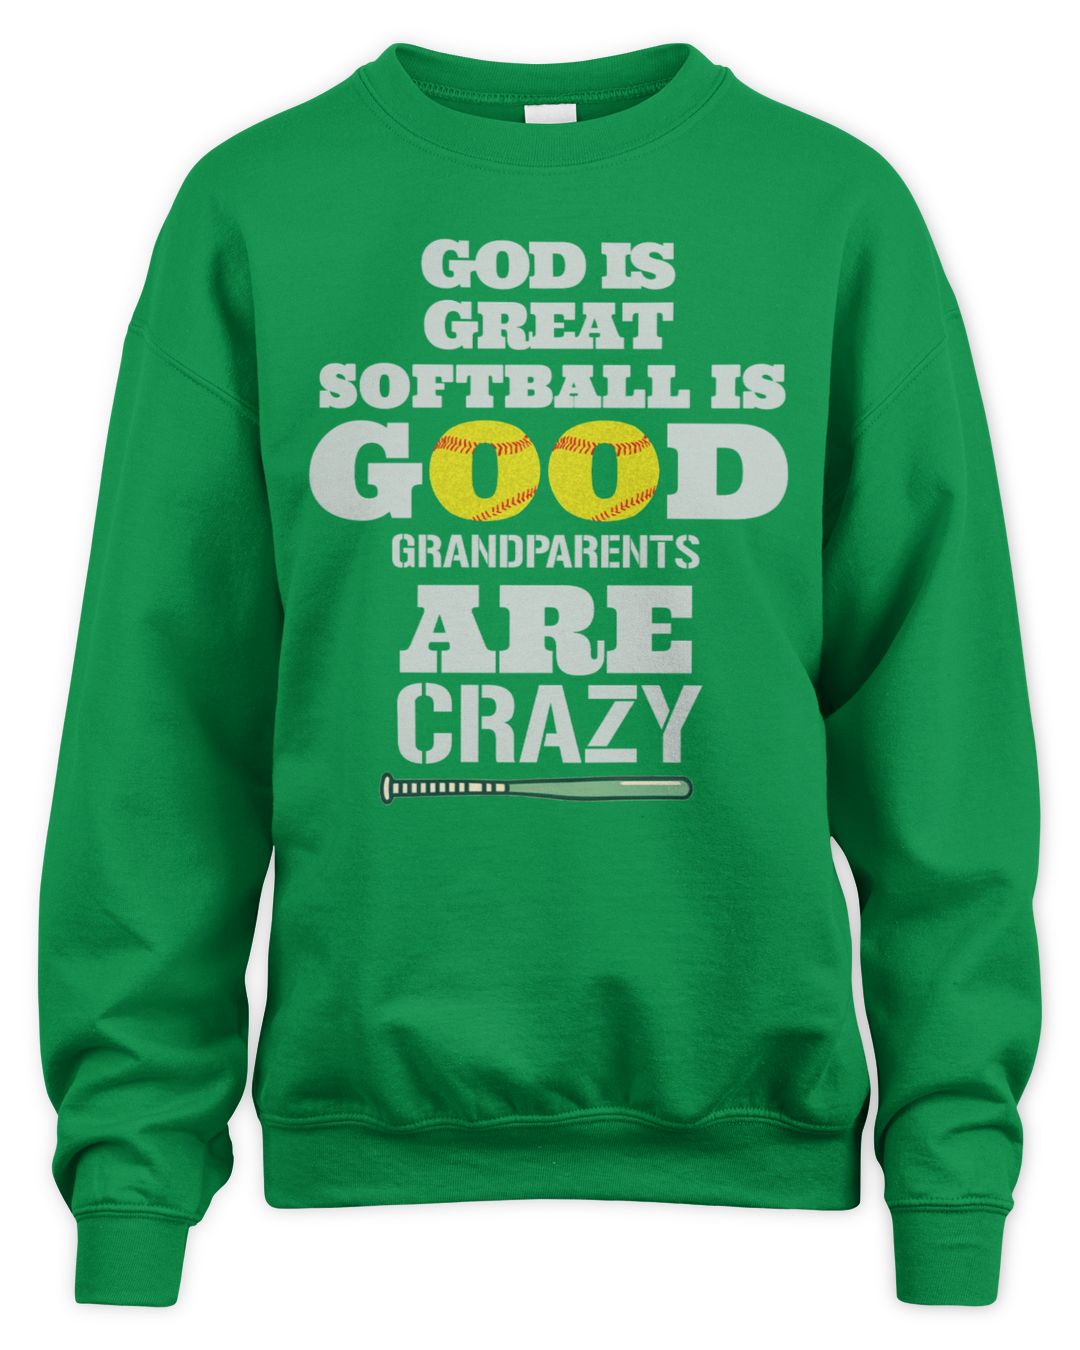 [Softball] - 285 - God Is Great Softball Is Good Grandparents Are Crazy ...